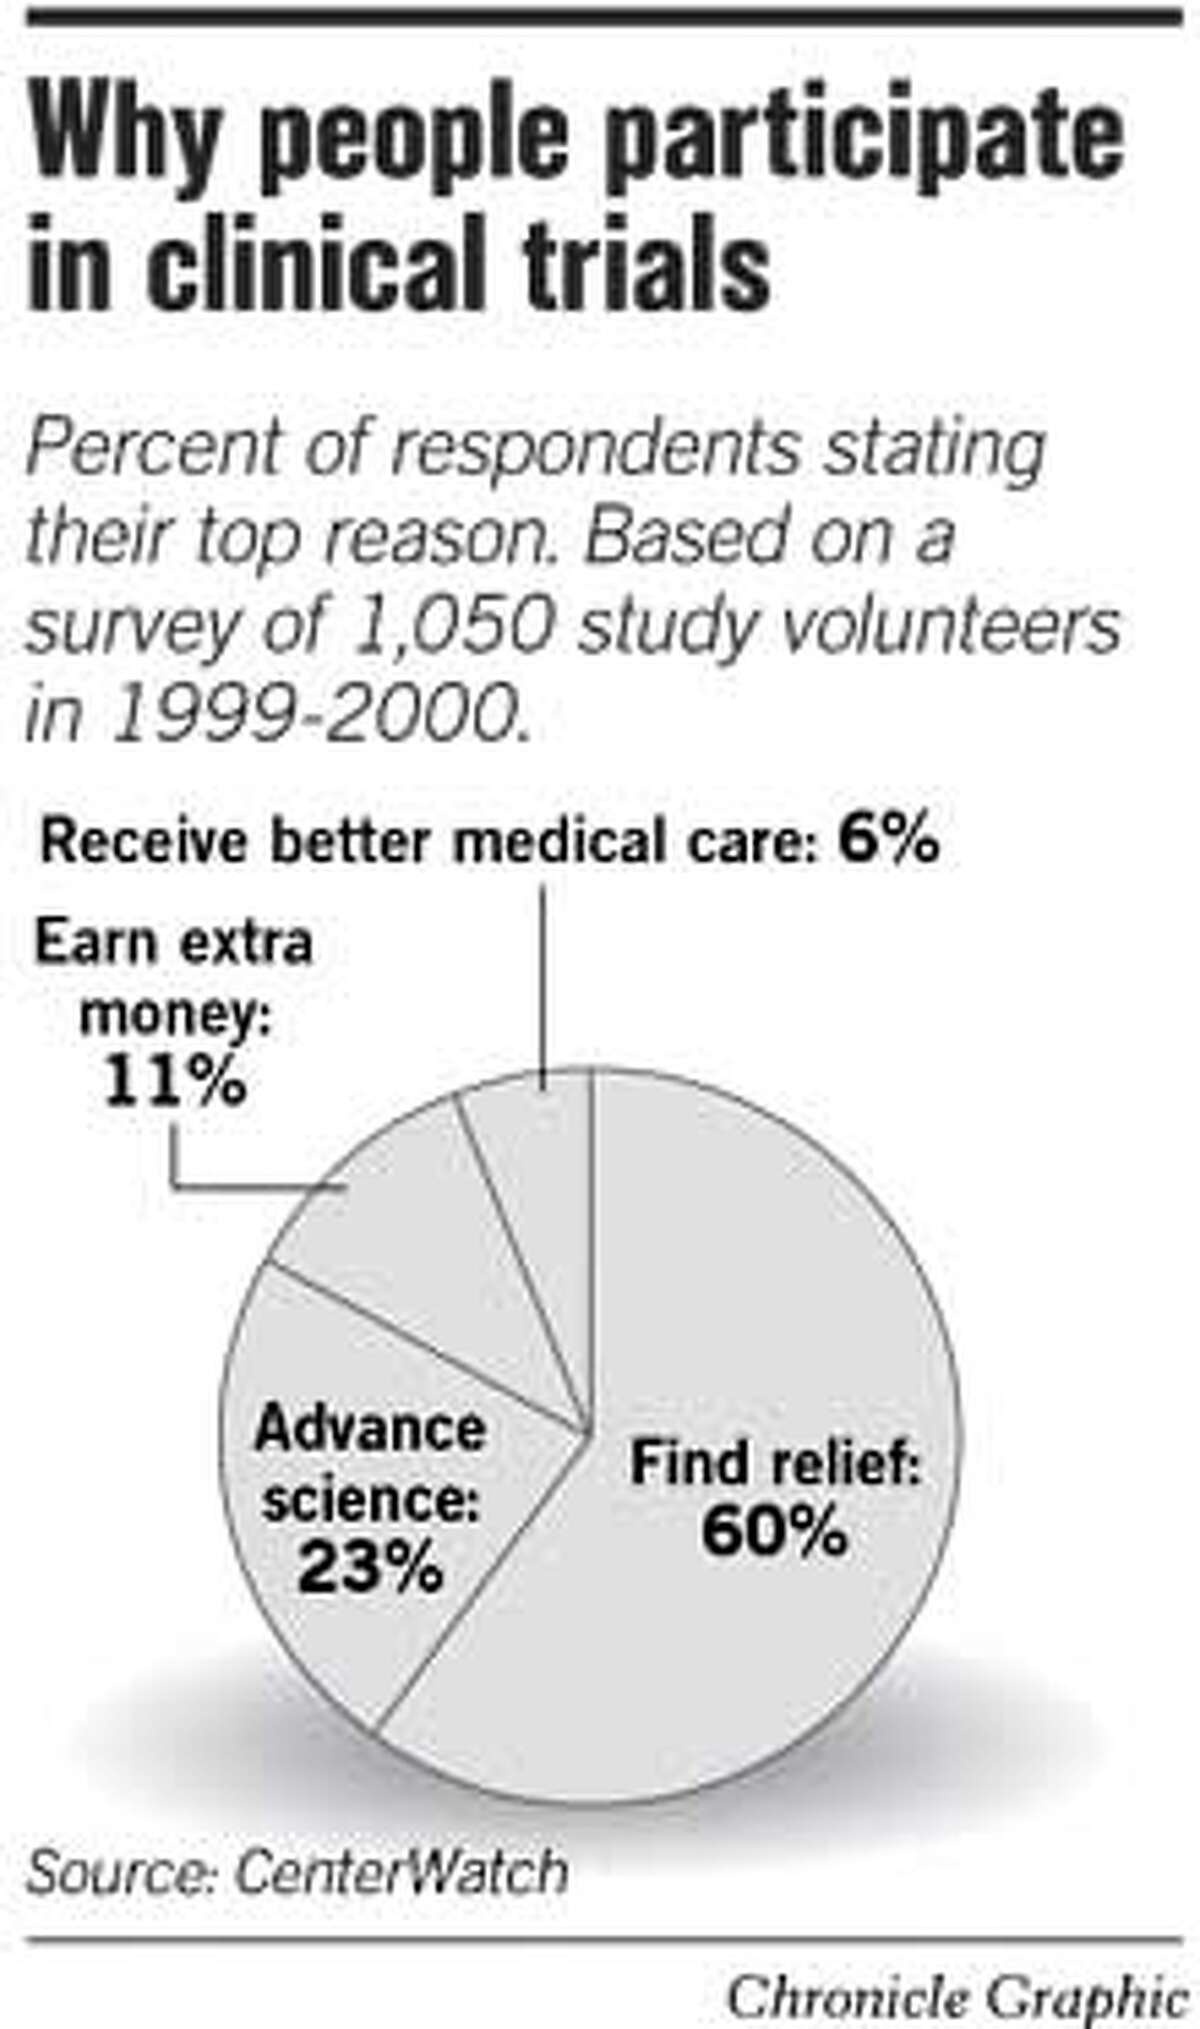 Why People Participate in Clinical Trials. Chronicle Graphic